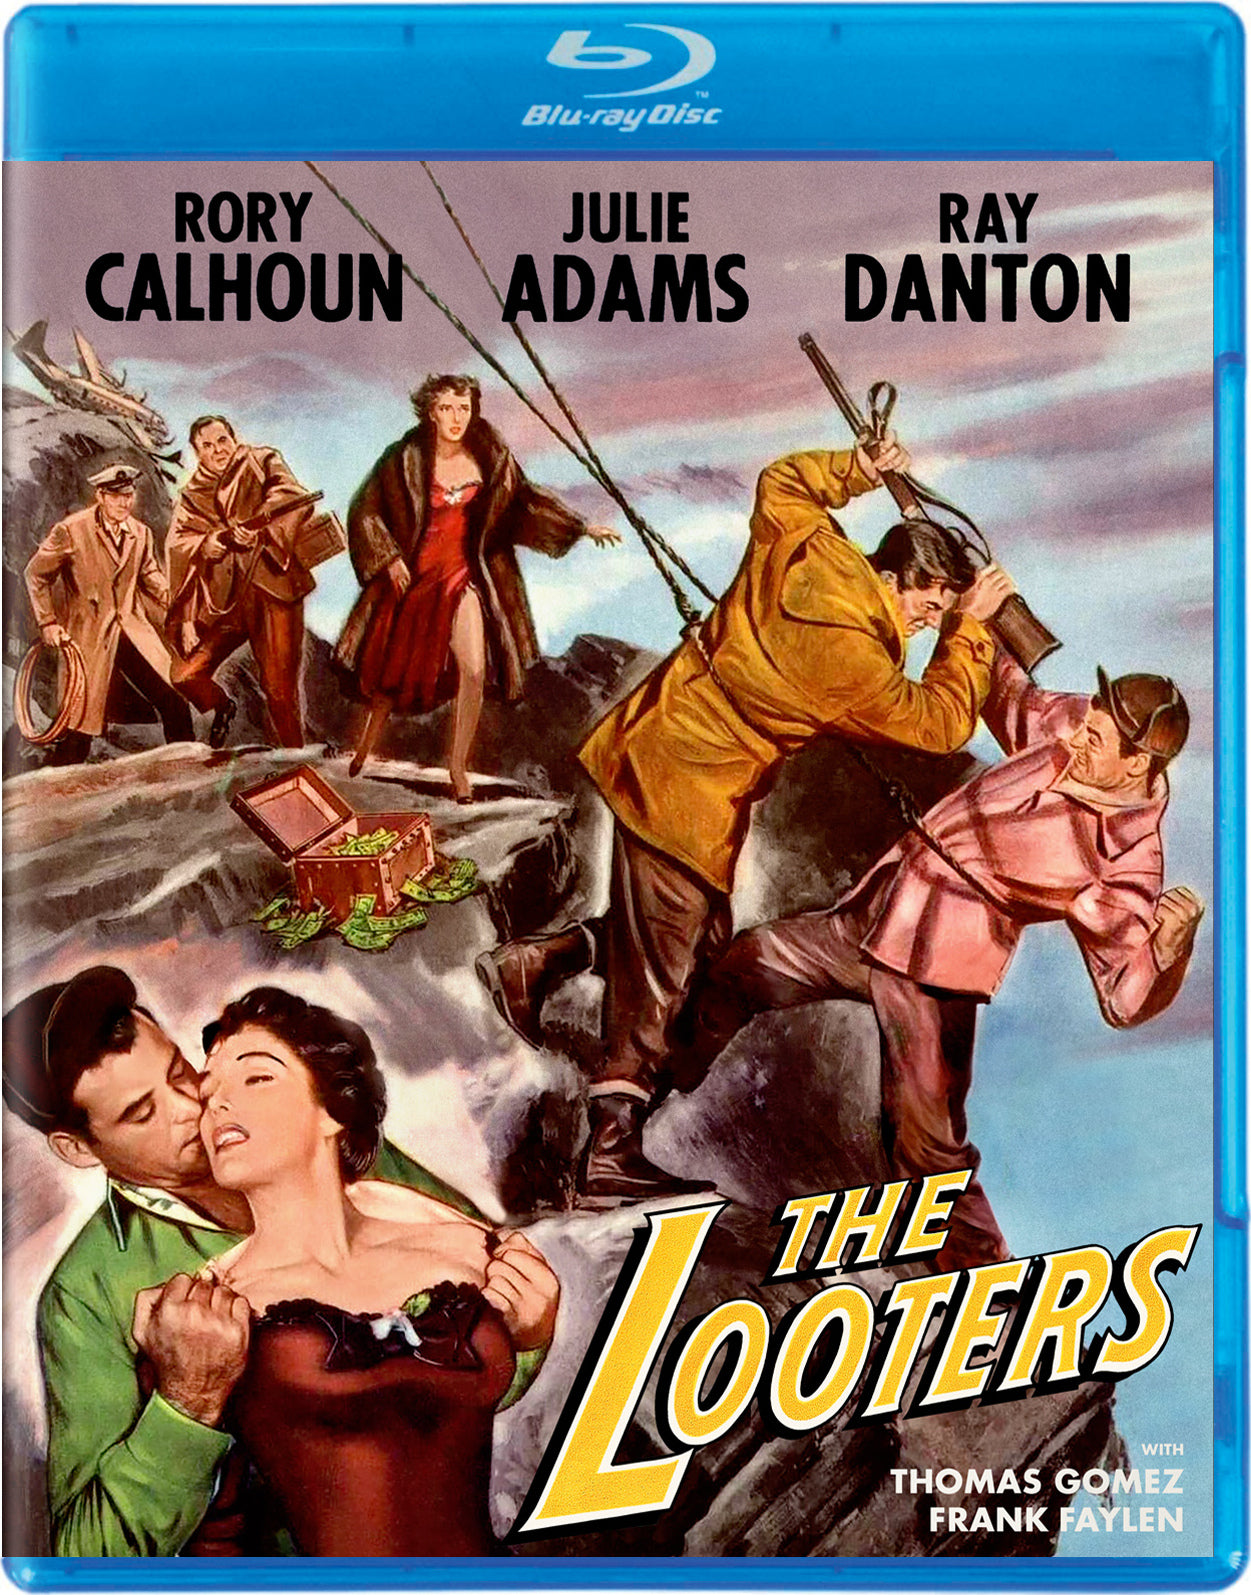 THE LOOTERS BLU-RAY